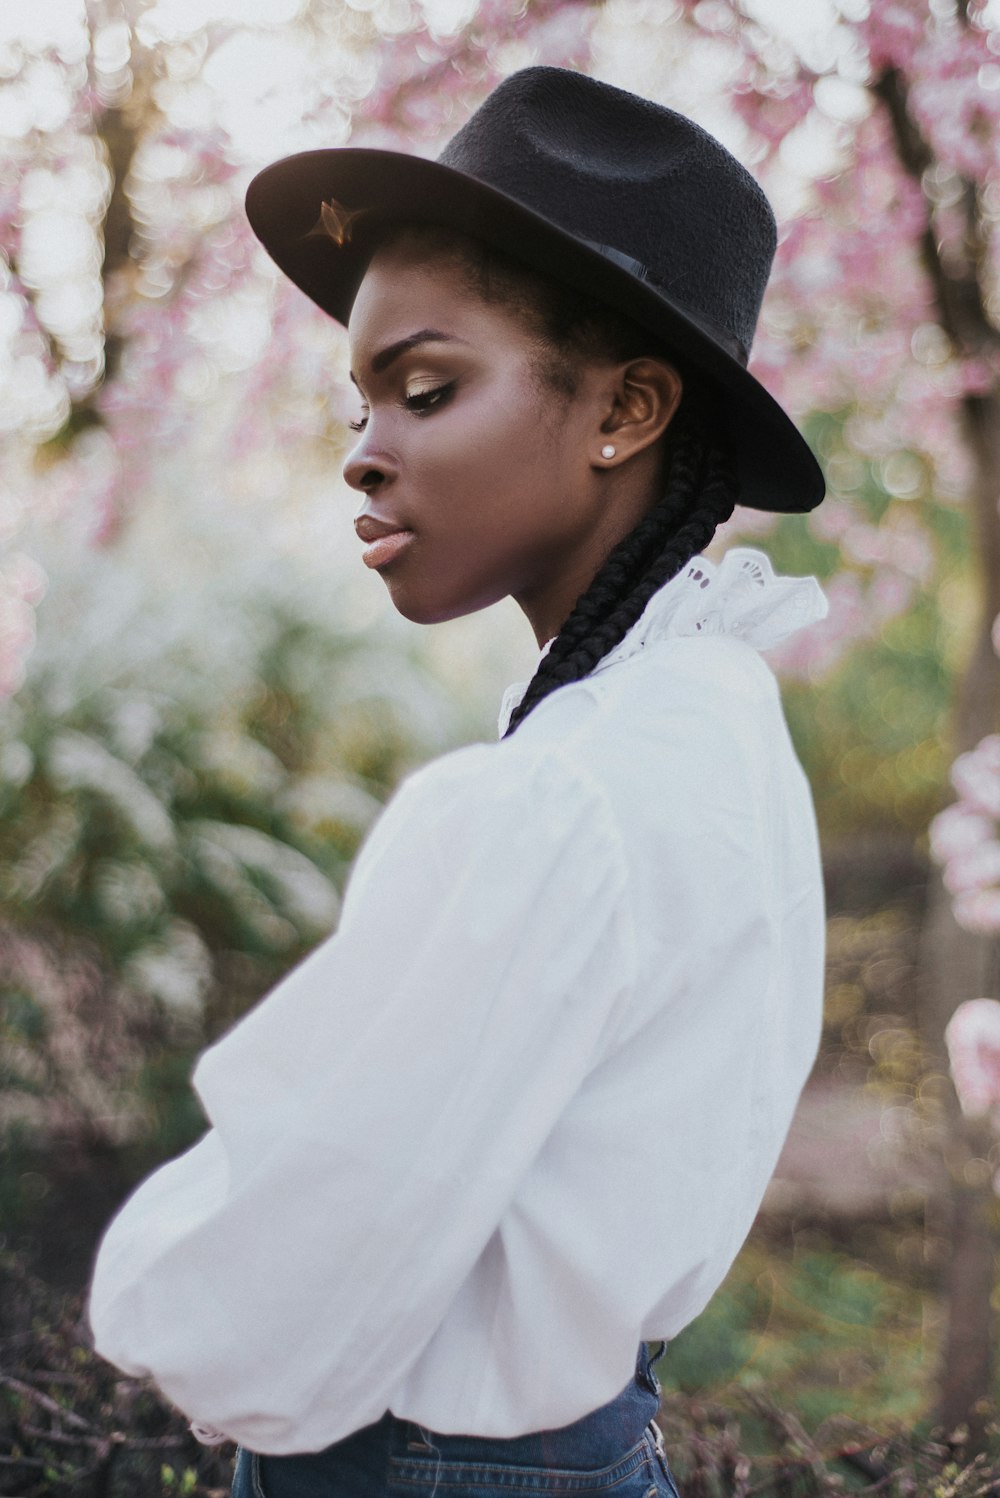 woman in white long sleeve shirt and black hat